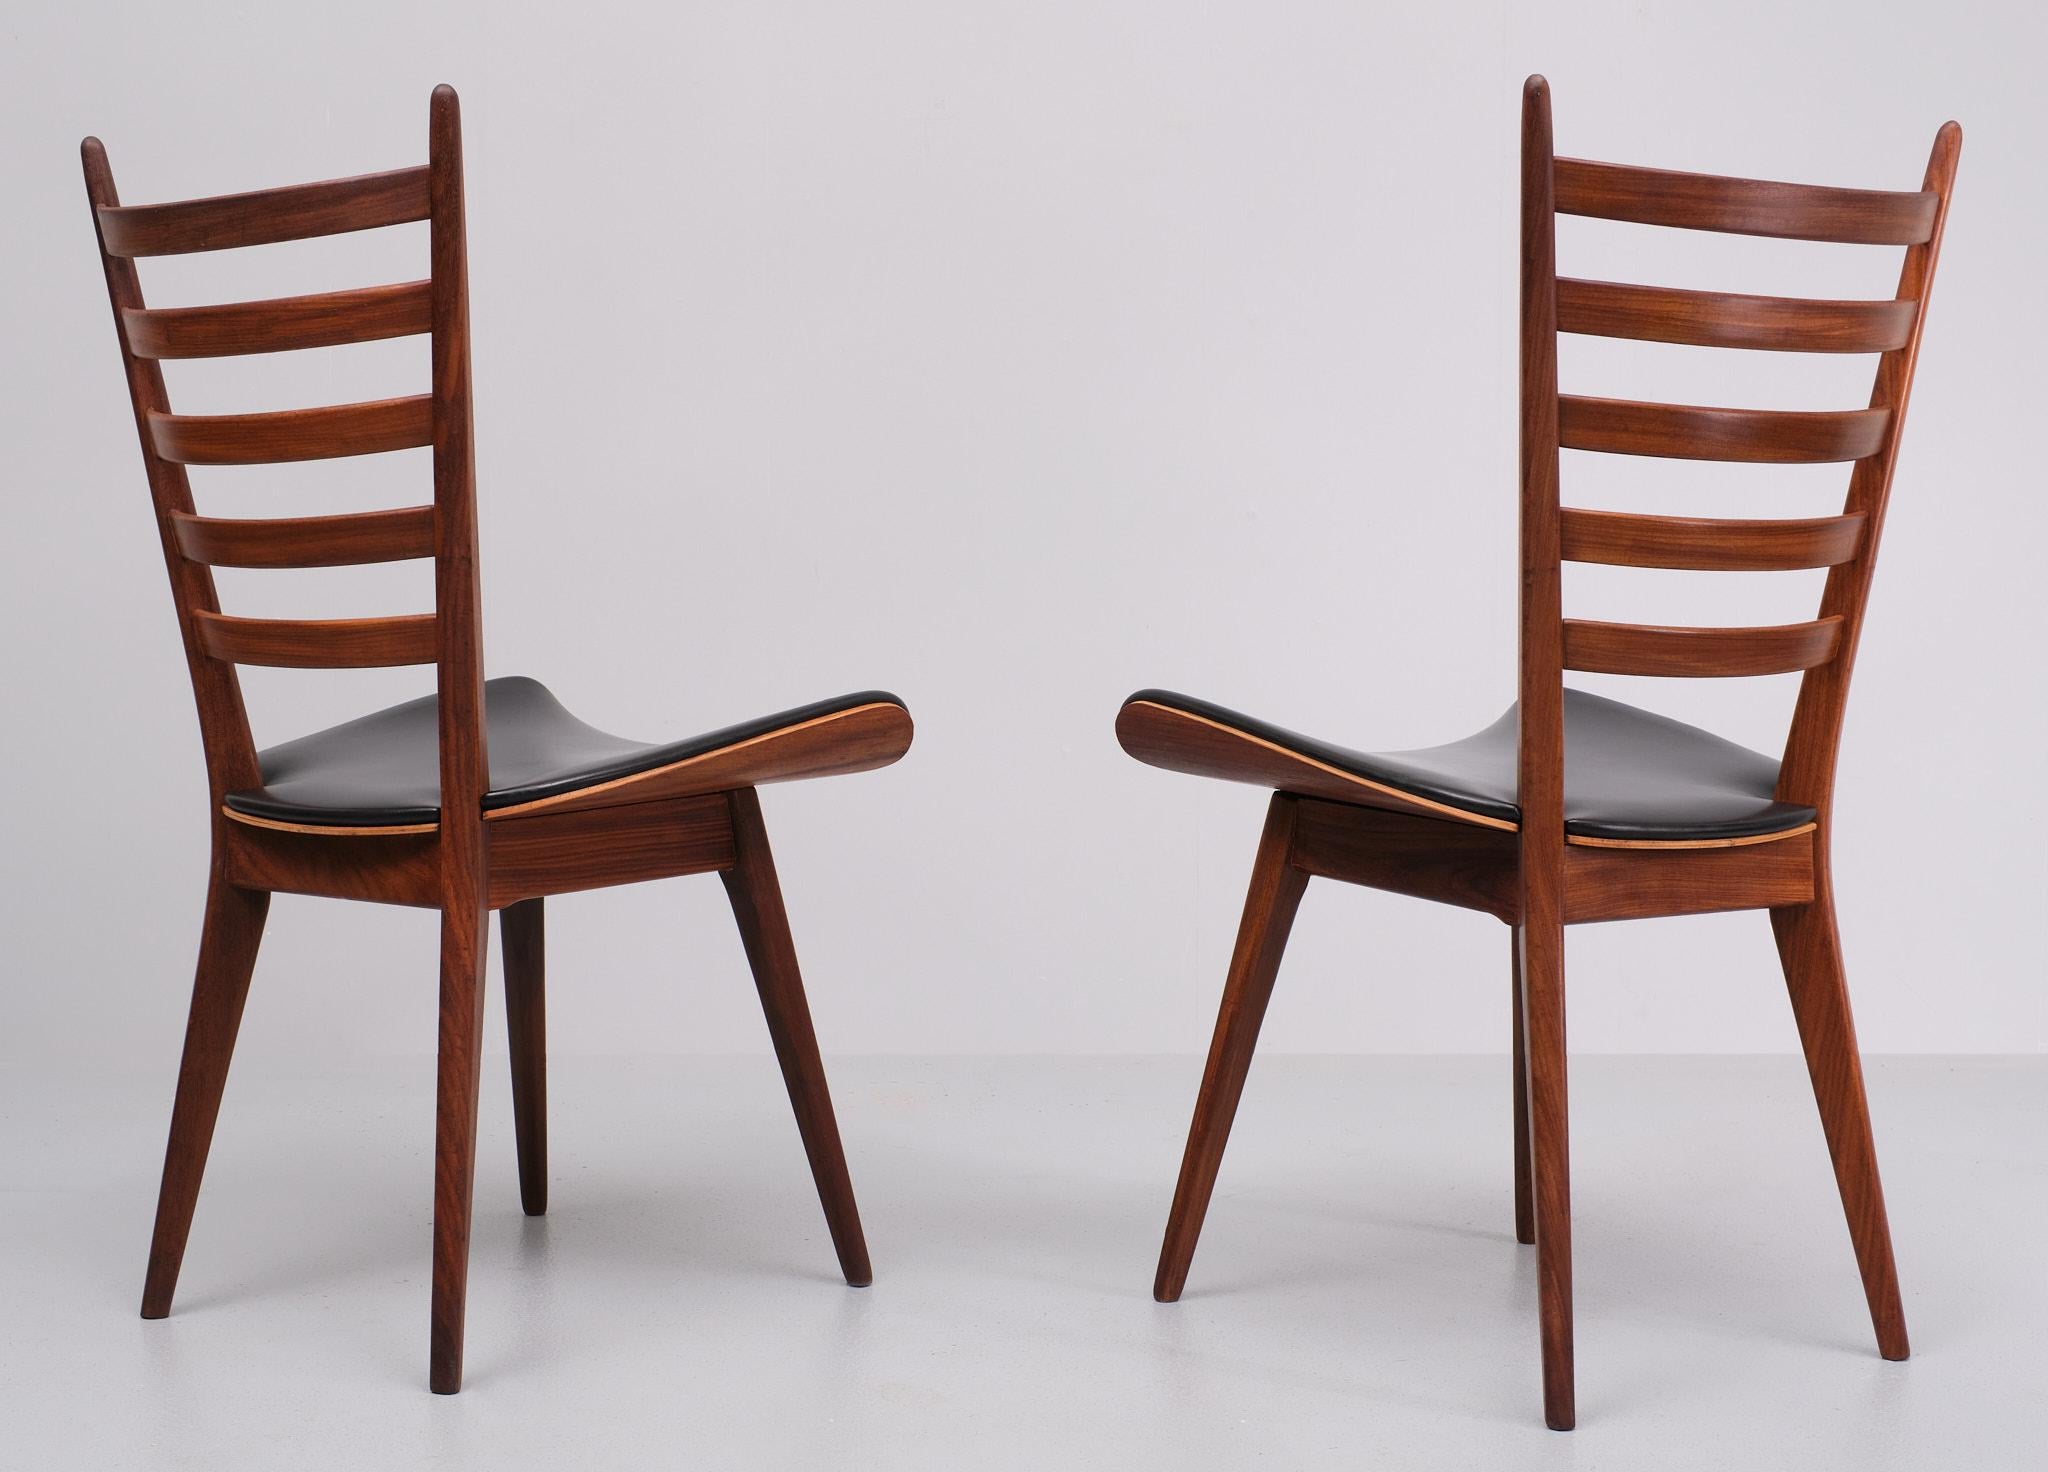 Dutch Cees Braakman  curved ladder chairs 1950s  Holland  For Sale